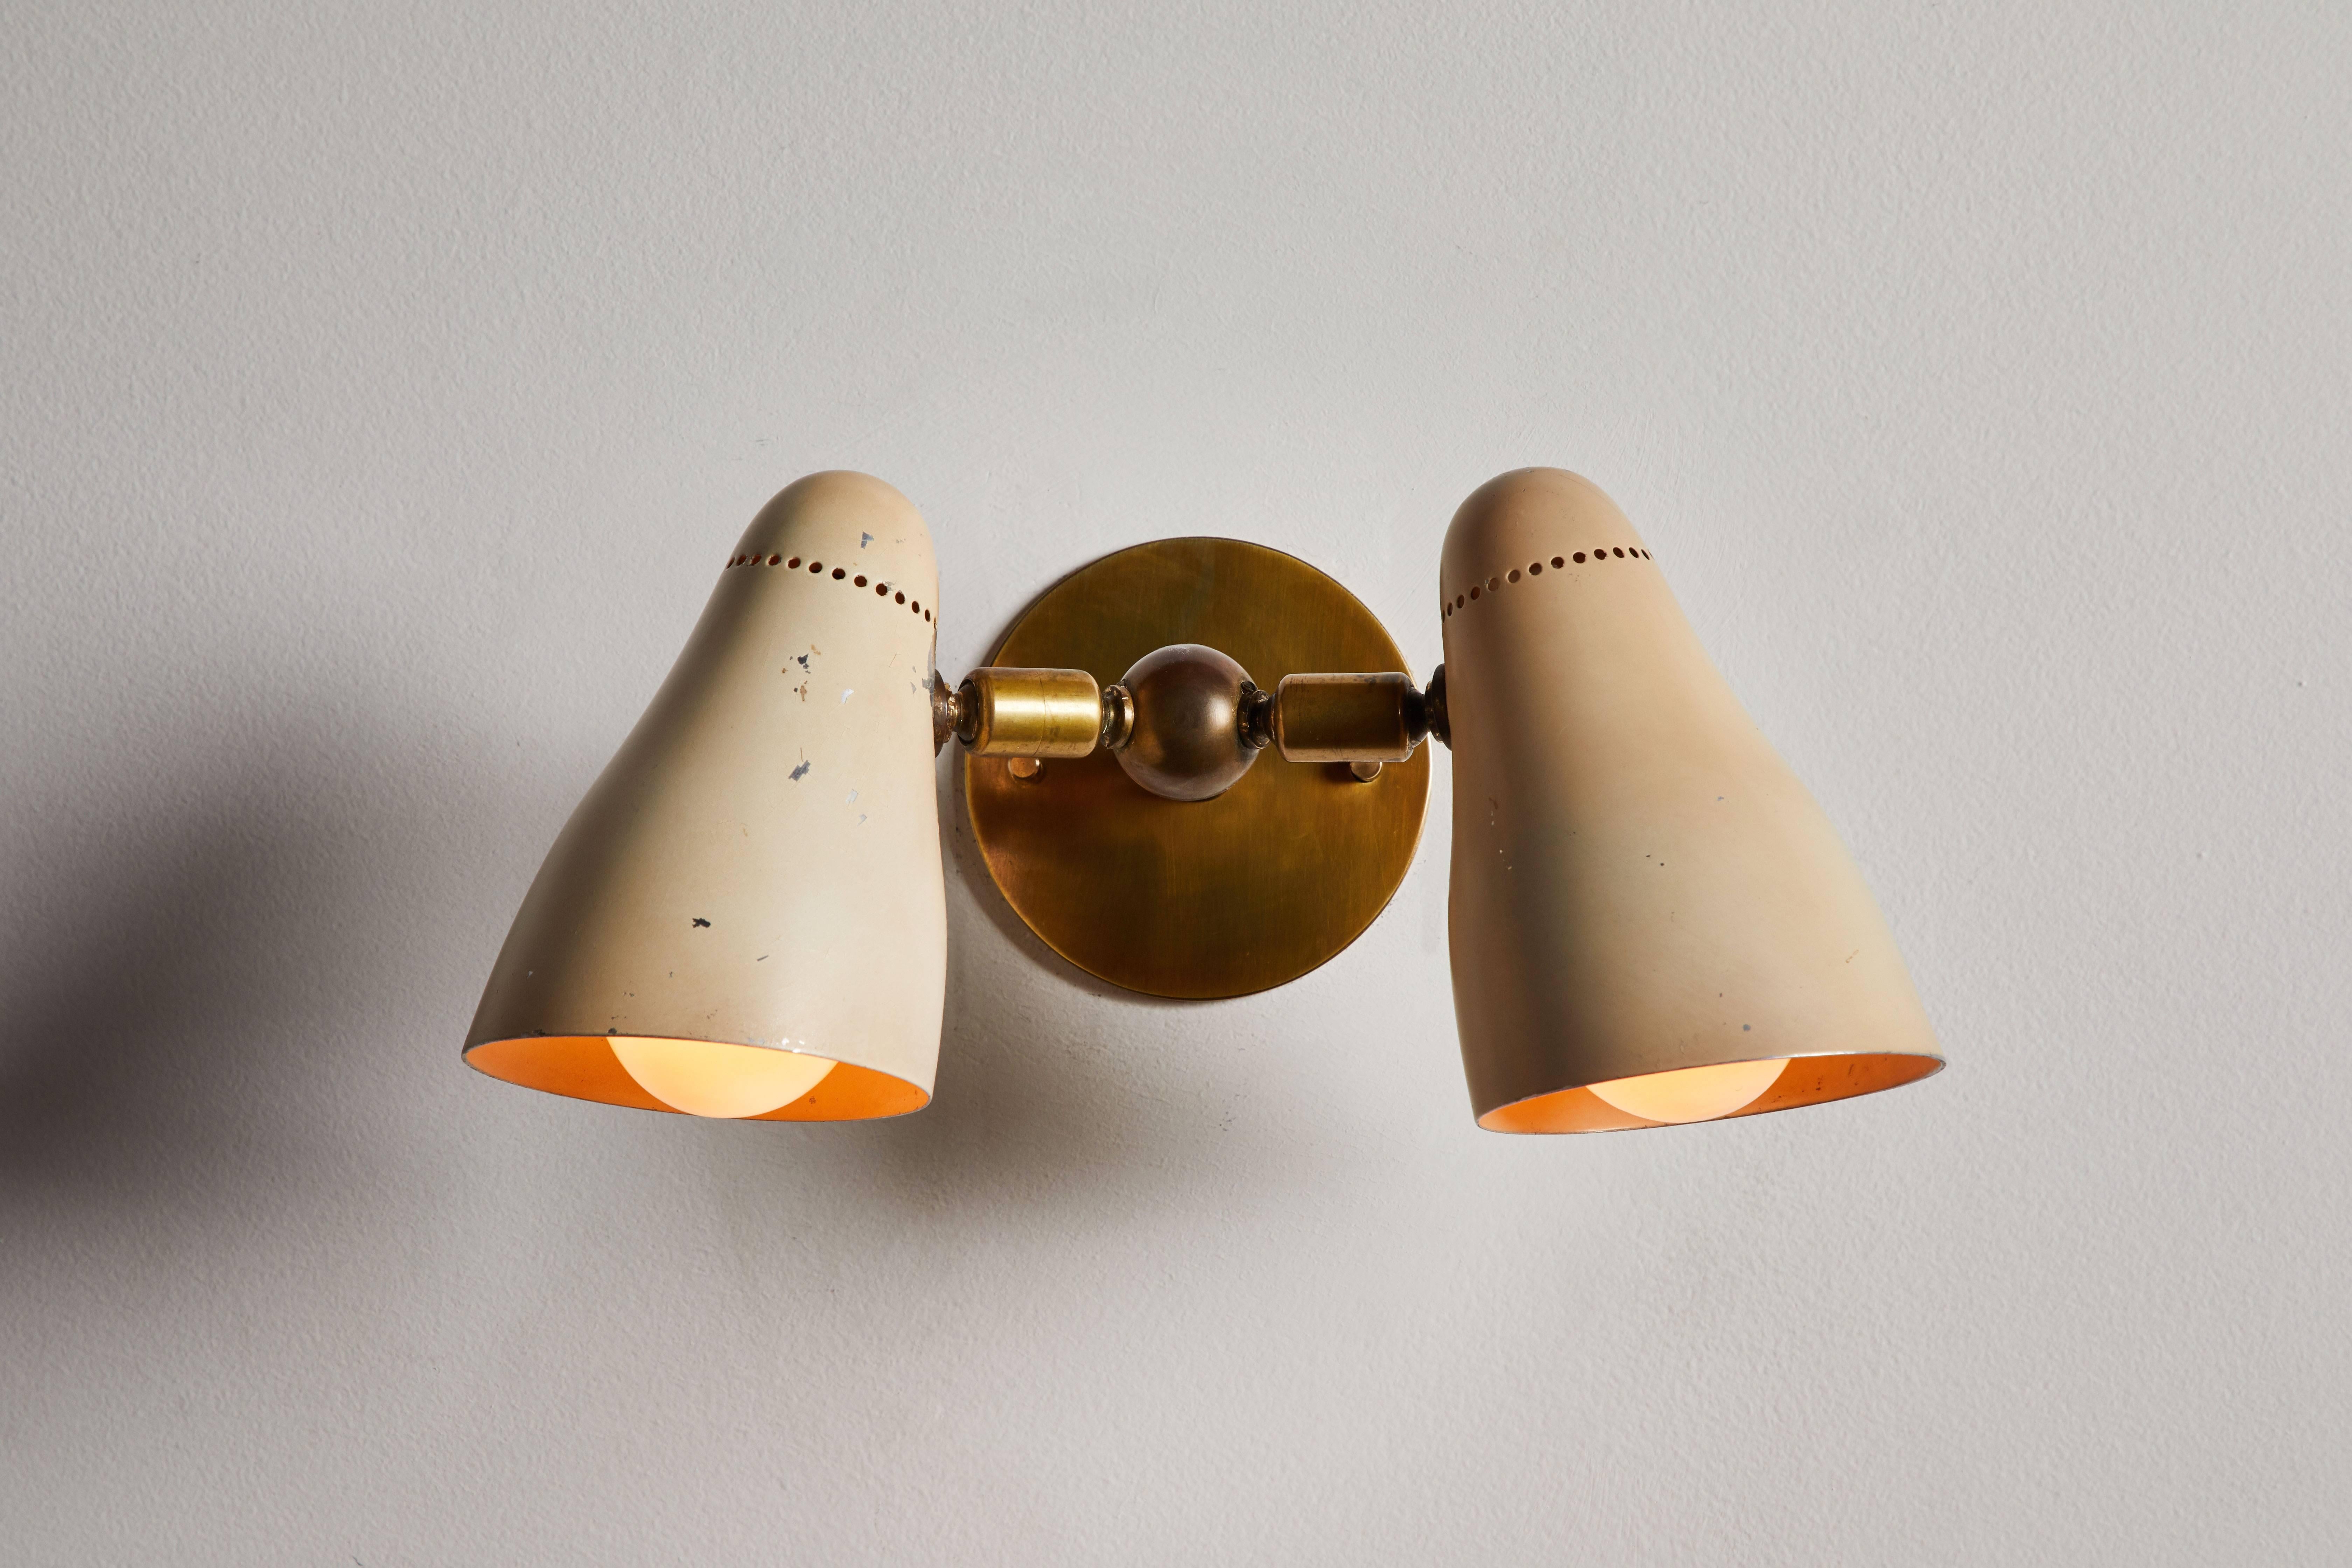 Pair of model 122 Doppia Vipera sconces by Giuseppe Ostuni for O-luce. Designed and manufactured for O-Light production in Milan, circa 1950s. Original enameled aluminium shades with articulating and pivoting brass arms. Custom brass backplate.